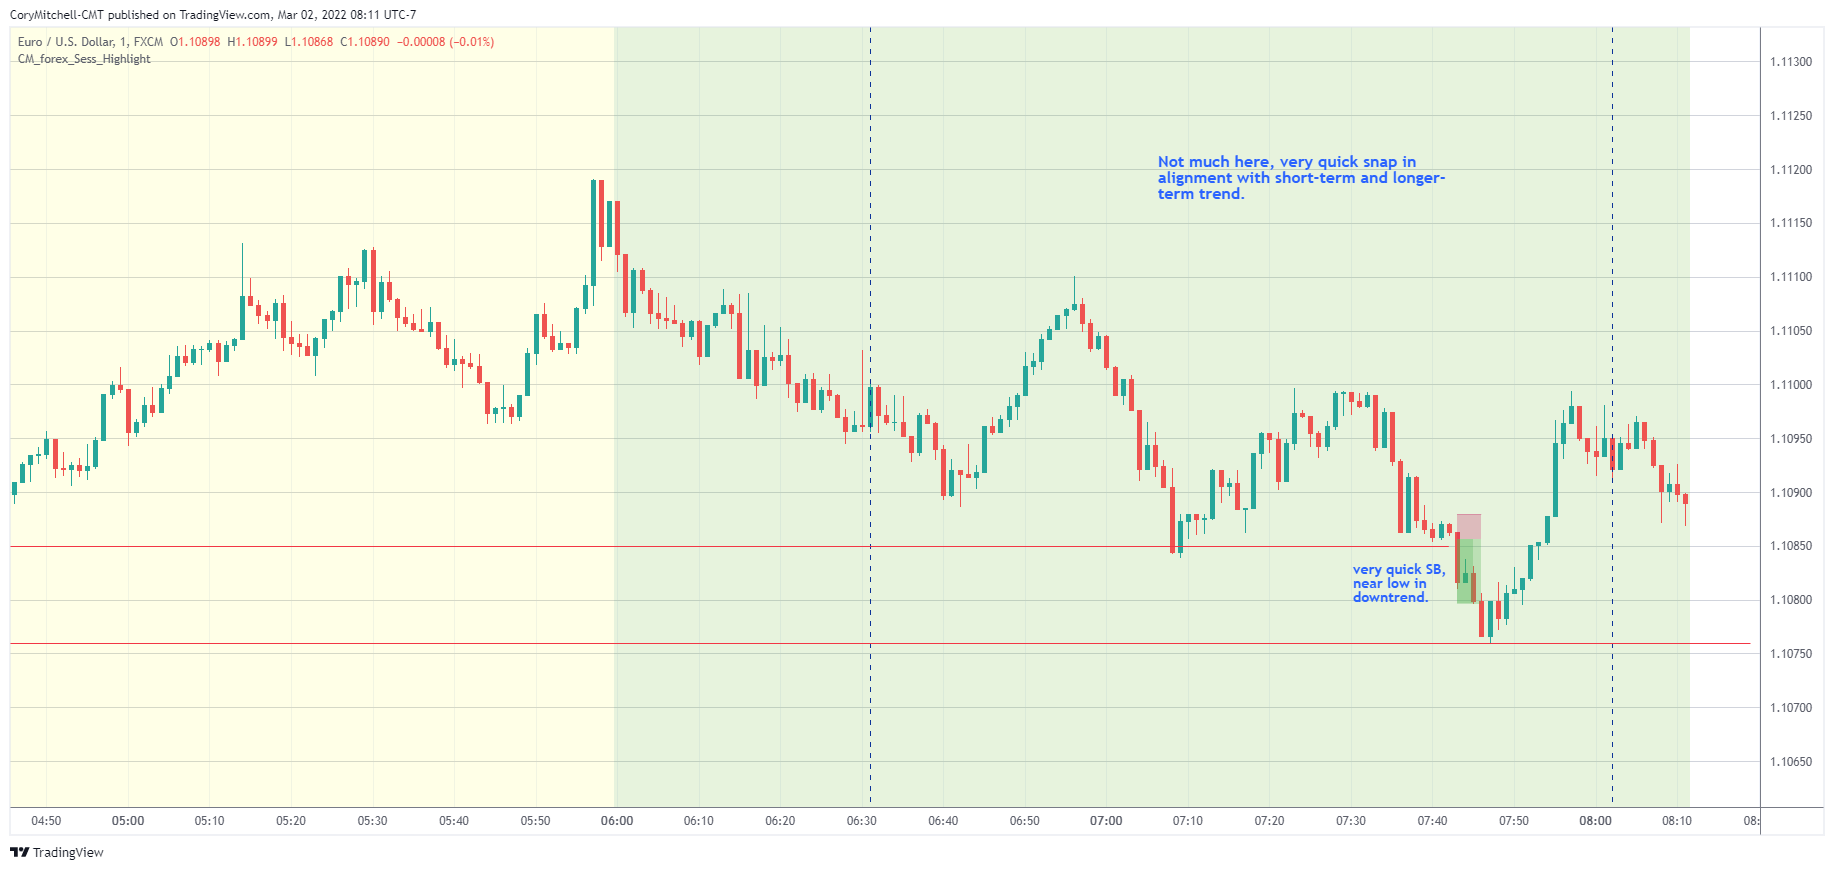 EURUSD day trading examples March 2